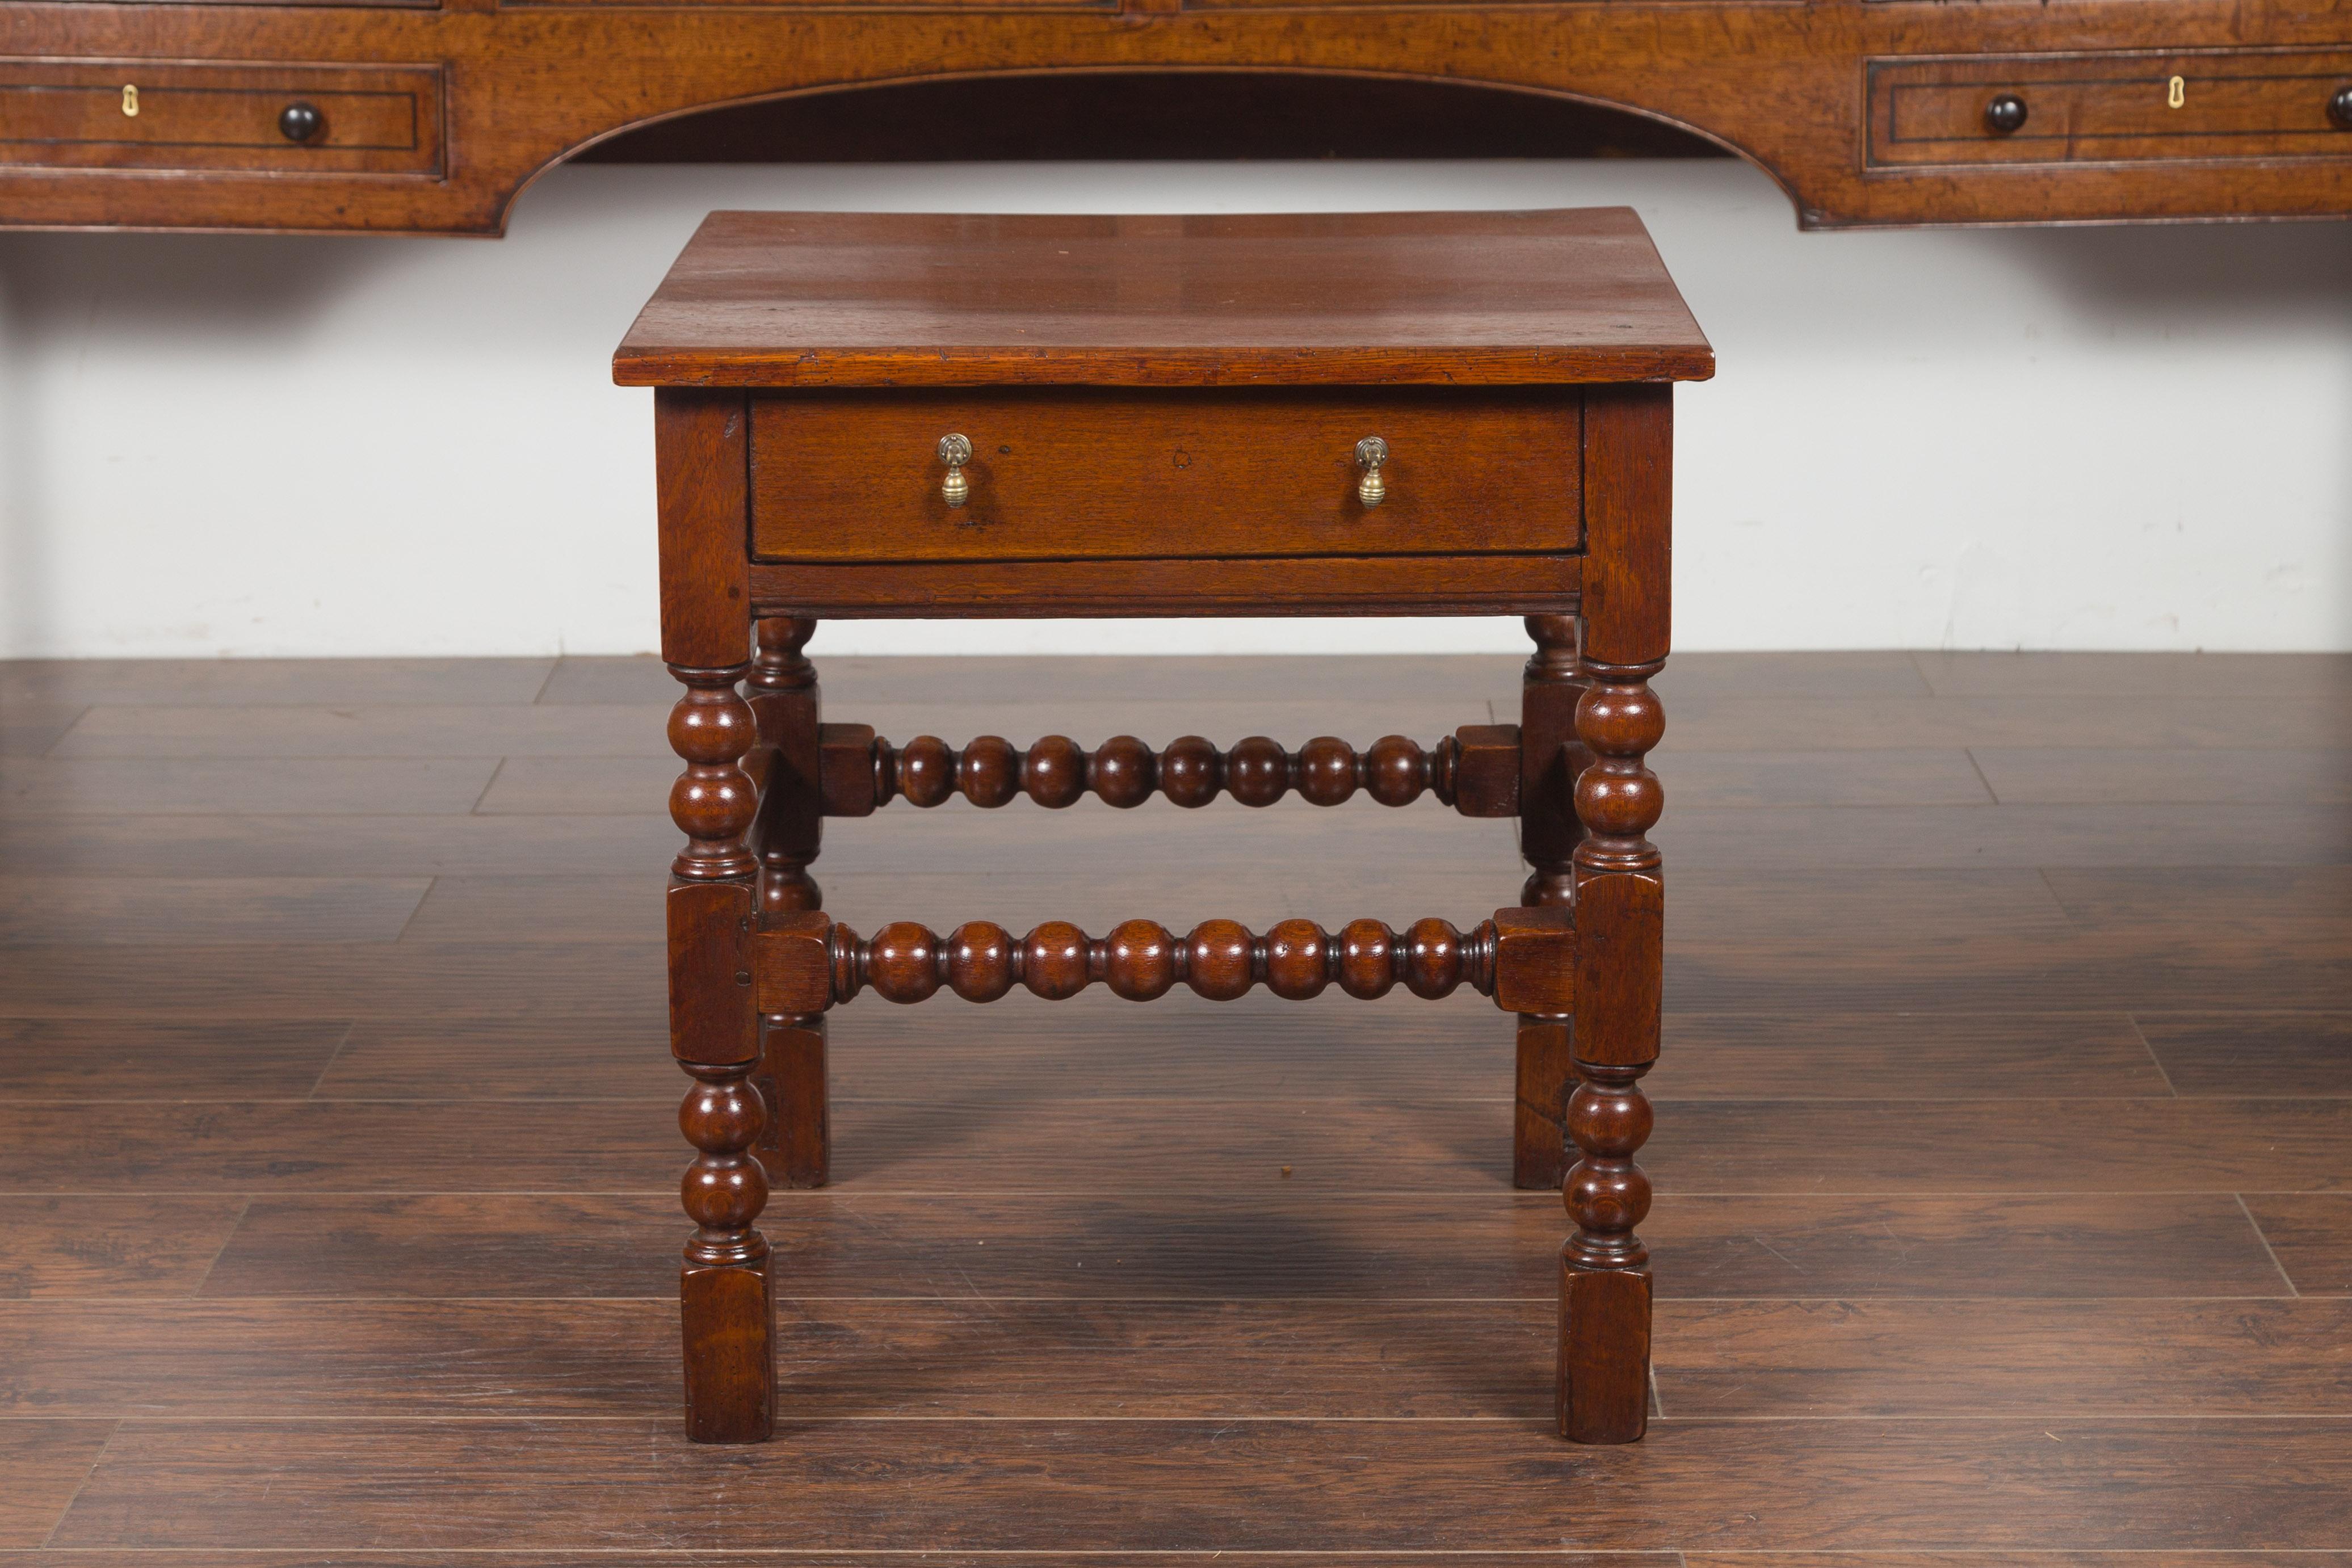 An English oak bobbin legs side table from the late 19th century, with single drawer and stretchers. Created in England during the third quarter of the 19th century, this oak side table features a rectangular top sitting above a single drawer,